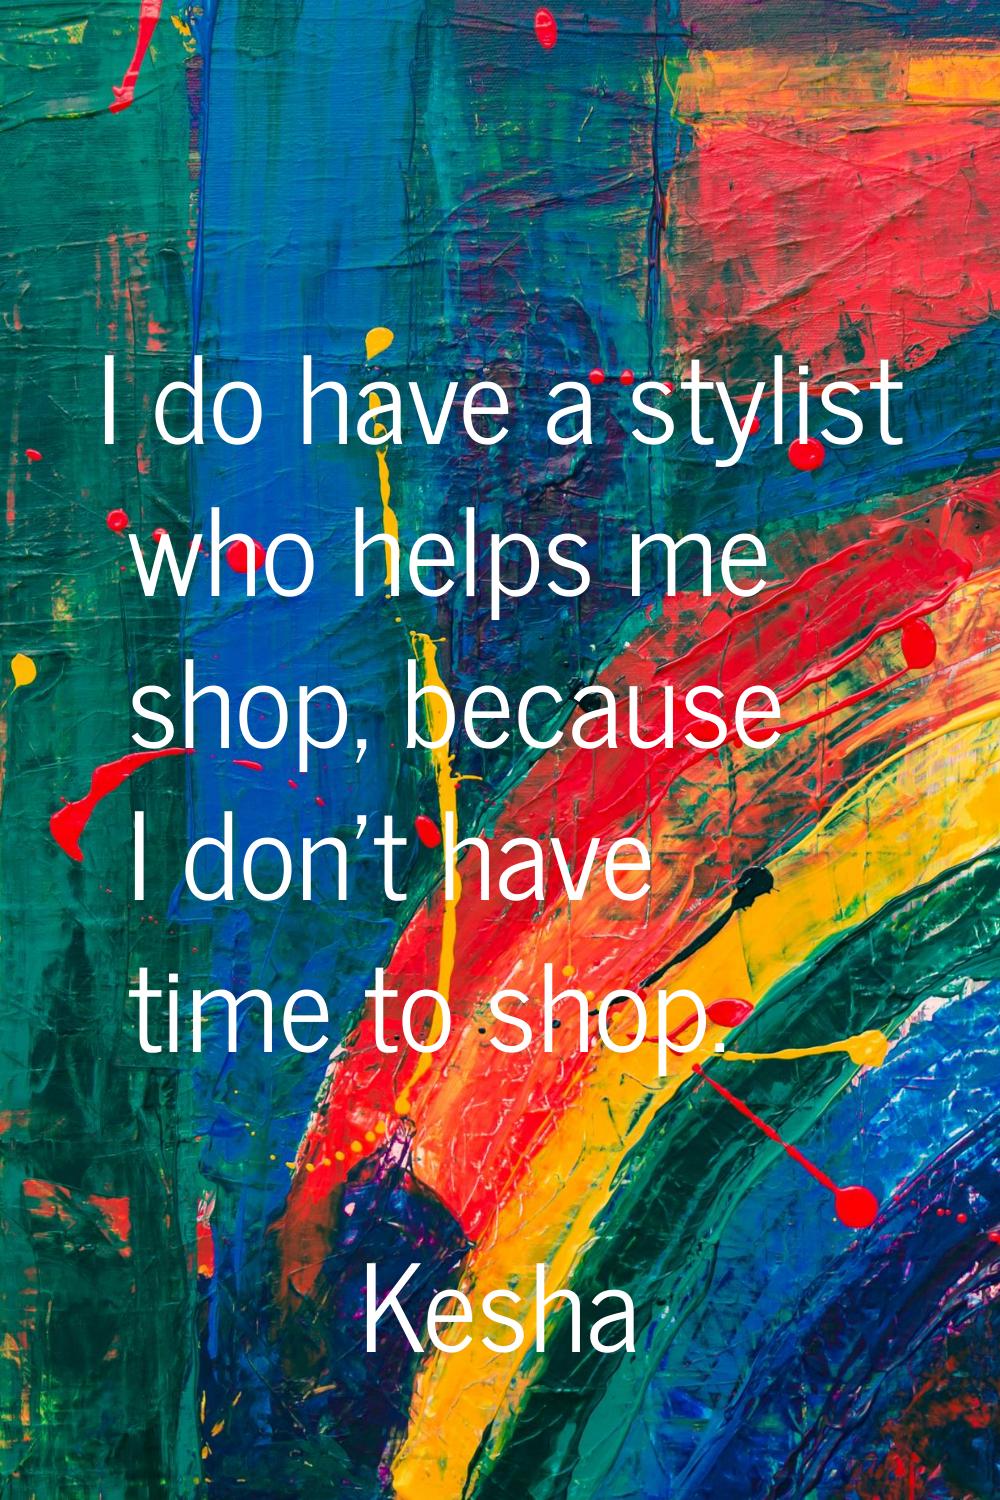 I do have a stylist who helps me shop, because I don't have time to shop.